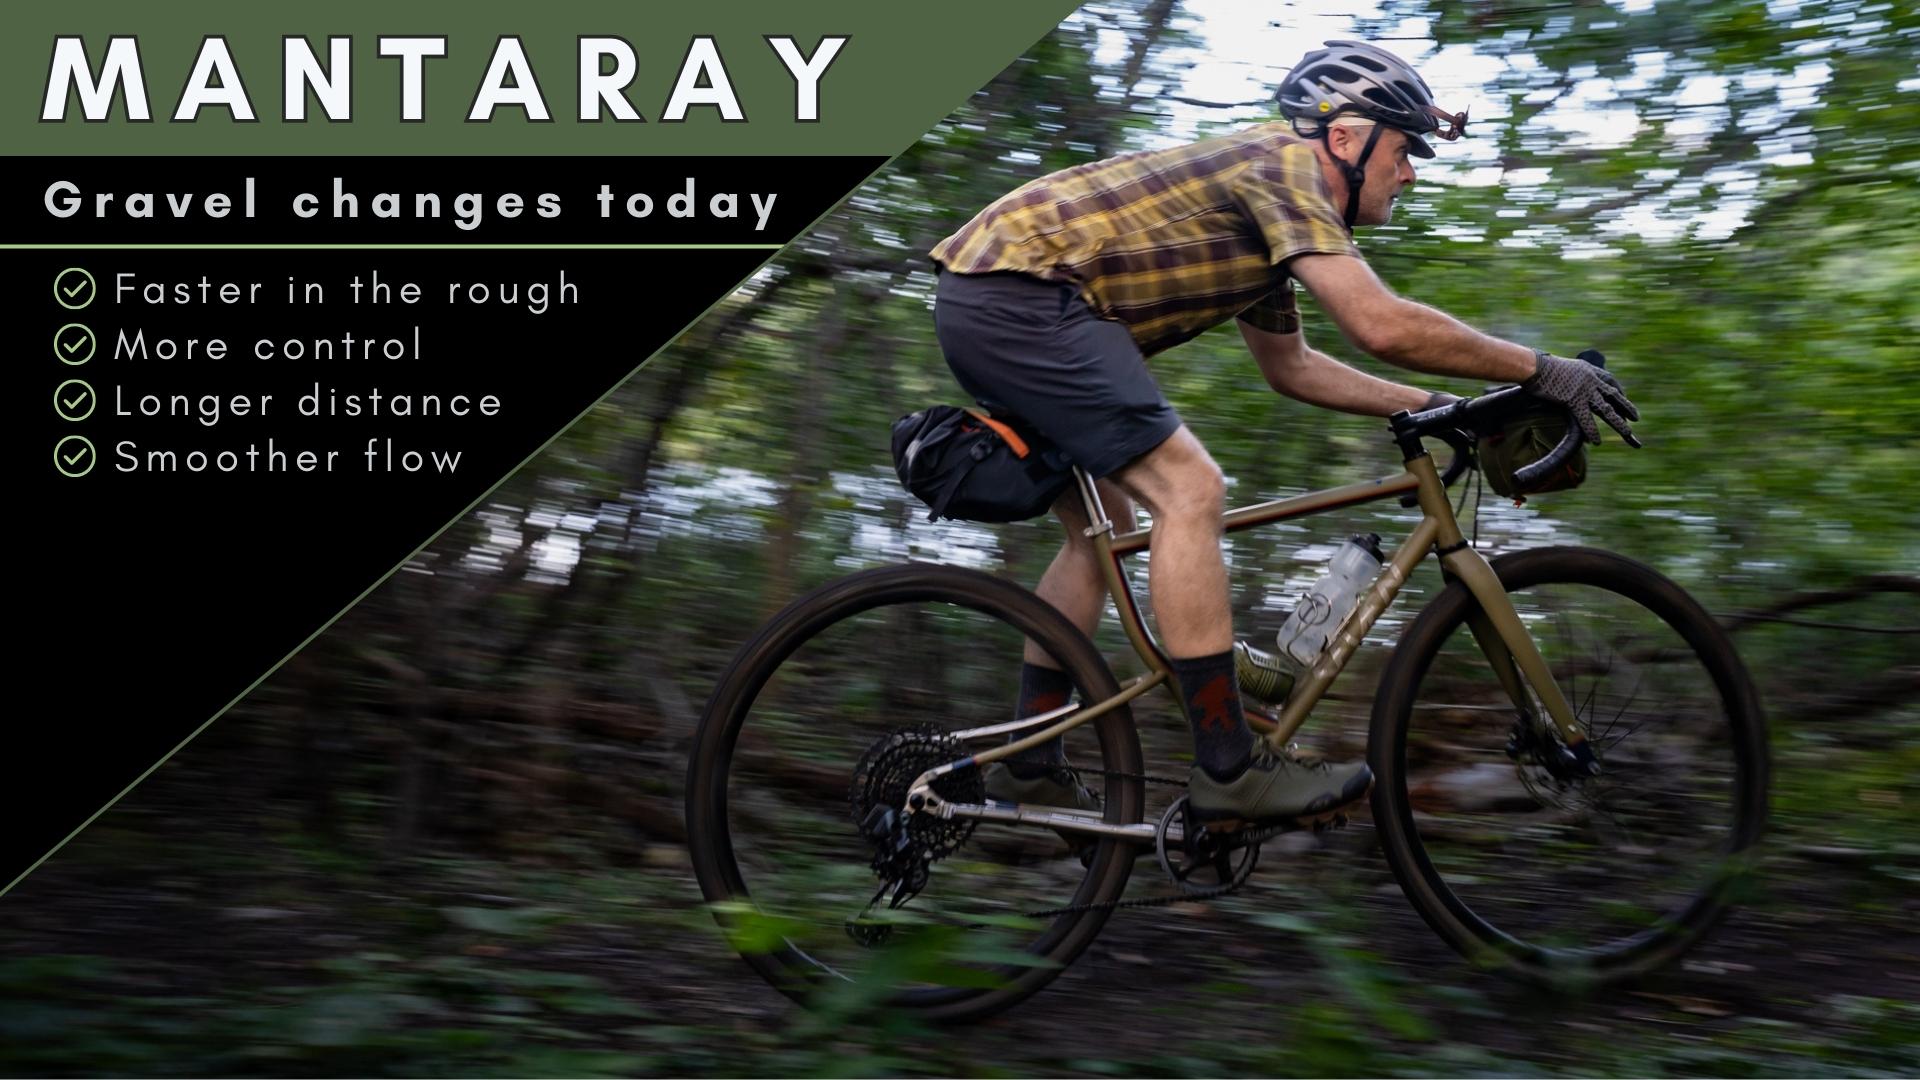 MantaRay: gravel changes today. Faster in the rough, more control, longer distance, smoother flow